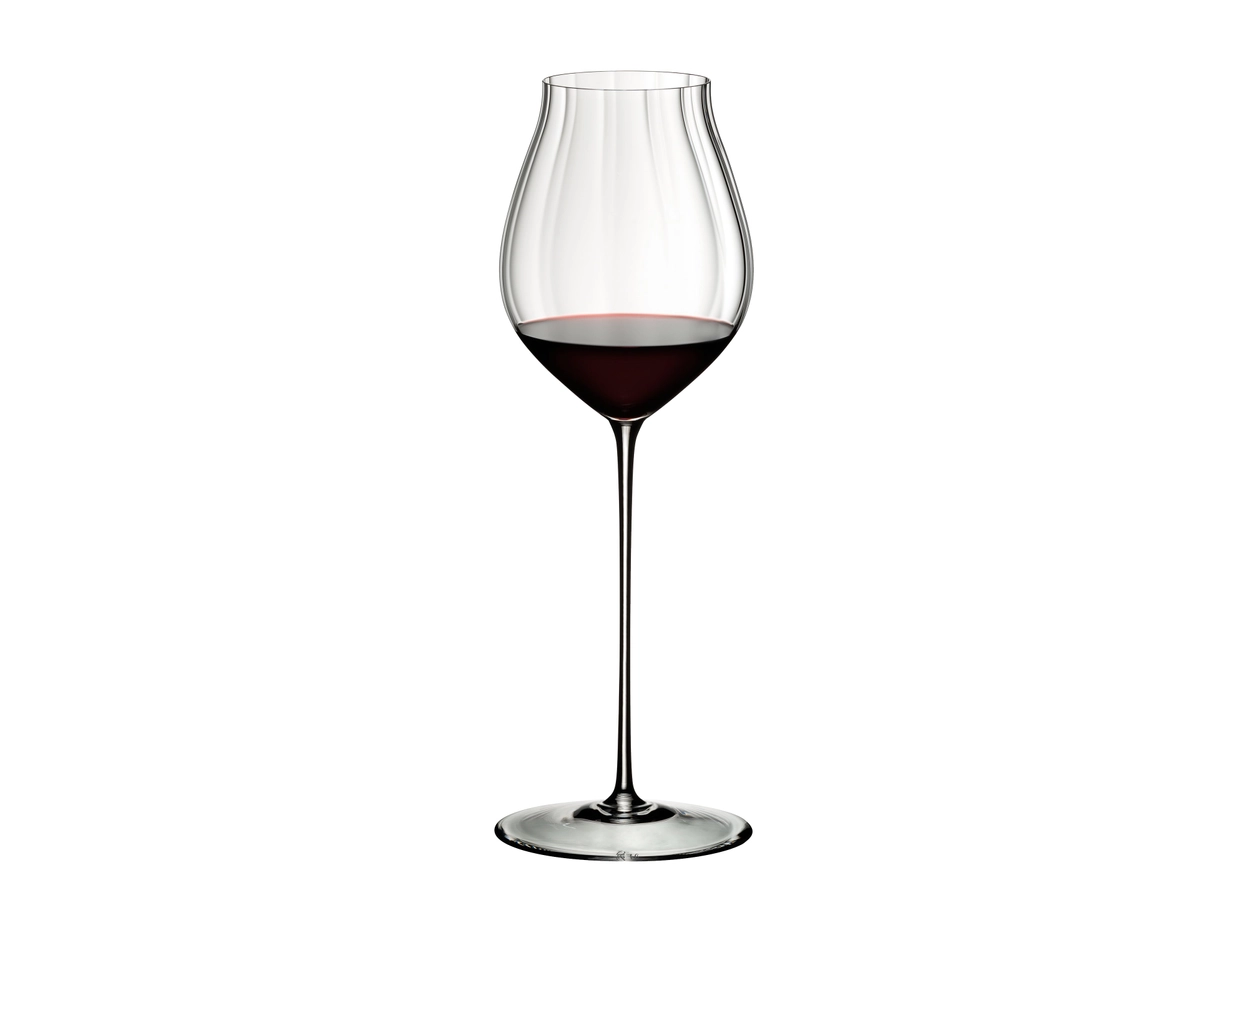 Riedel High Performance Pinot Noir Glass, Clear stem Set of 4 pieces